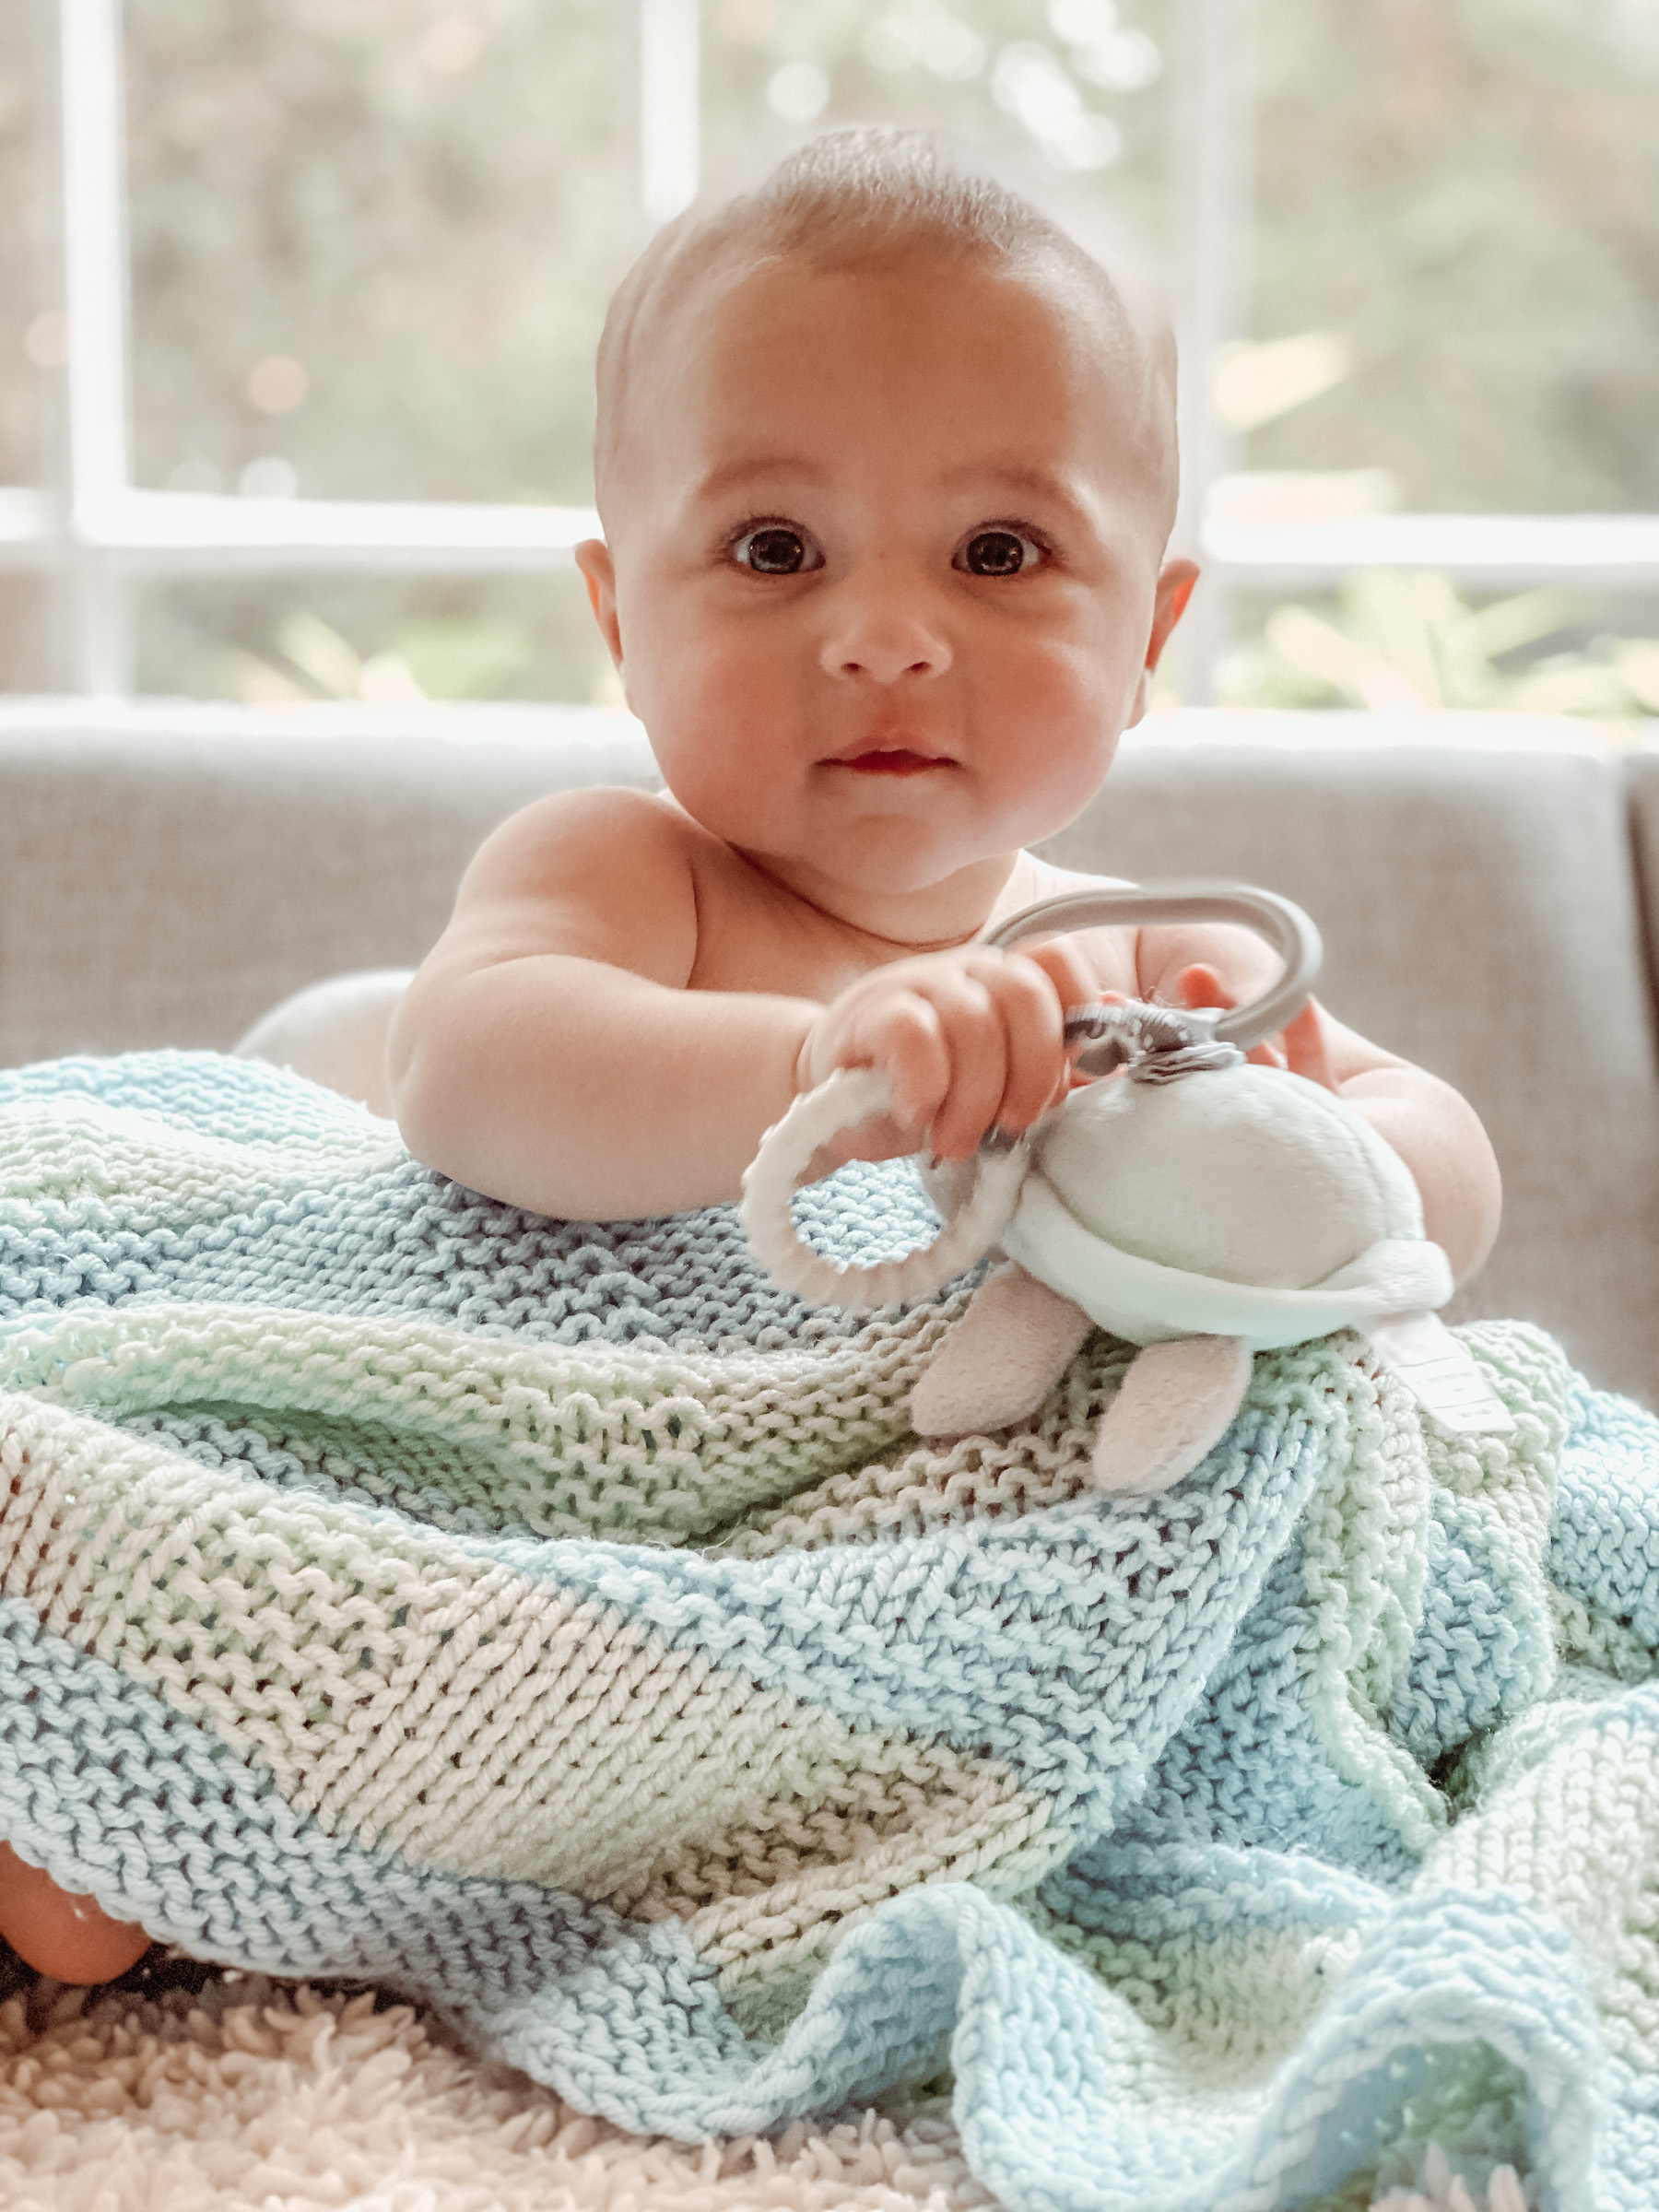 Ravelry: Three Wishes Baby Blanket pattern by candylou